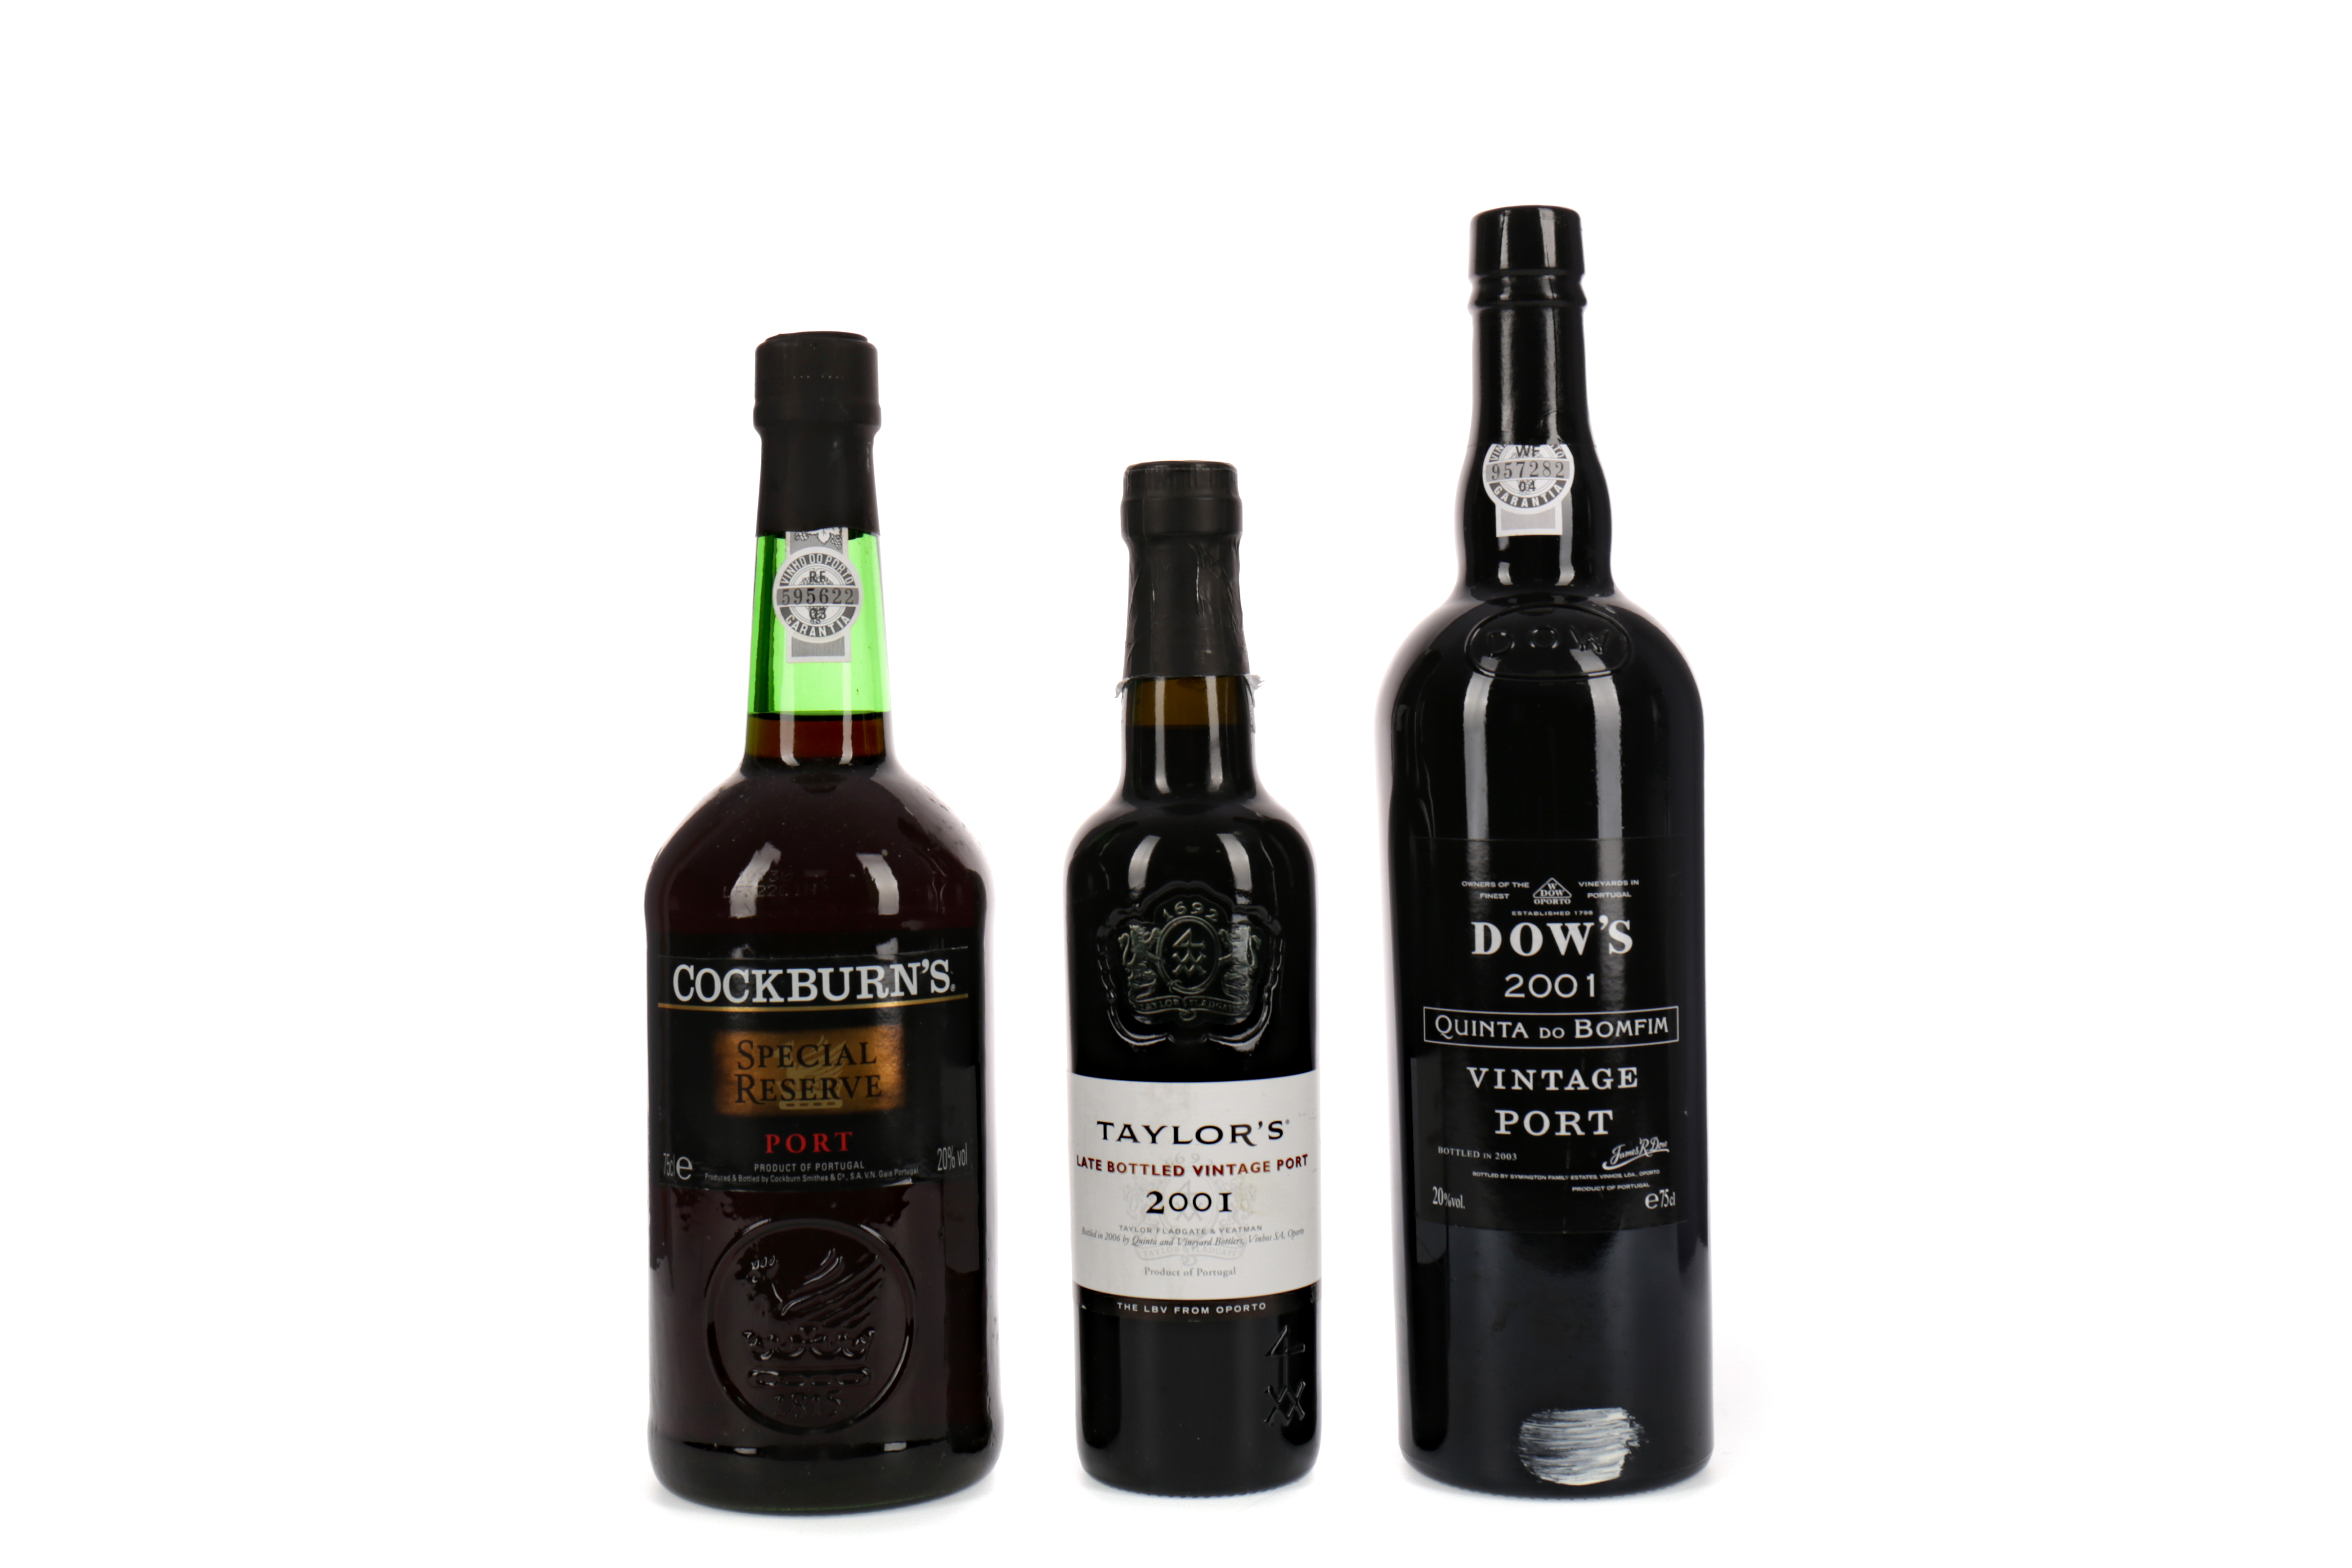 DOW'S 2001, TAYLOR'S 2001 AND COCKBURN'S SPECIAL RESERVE